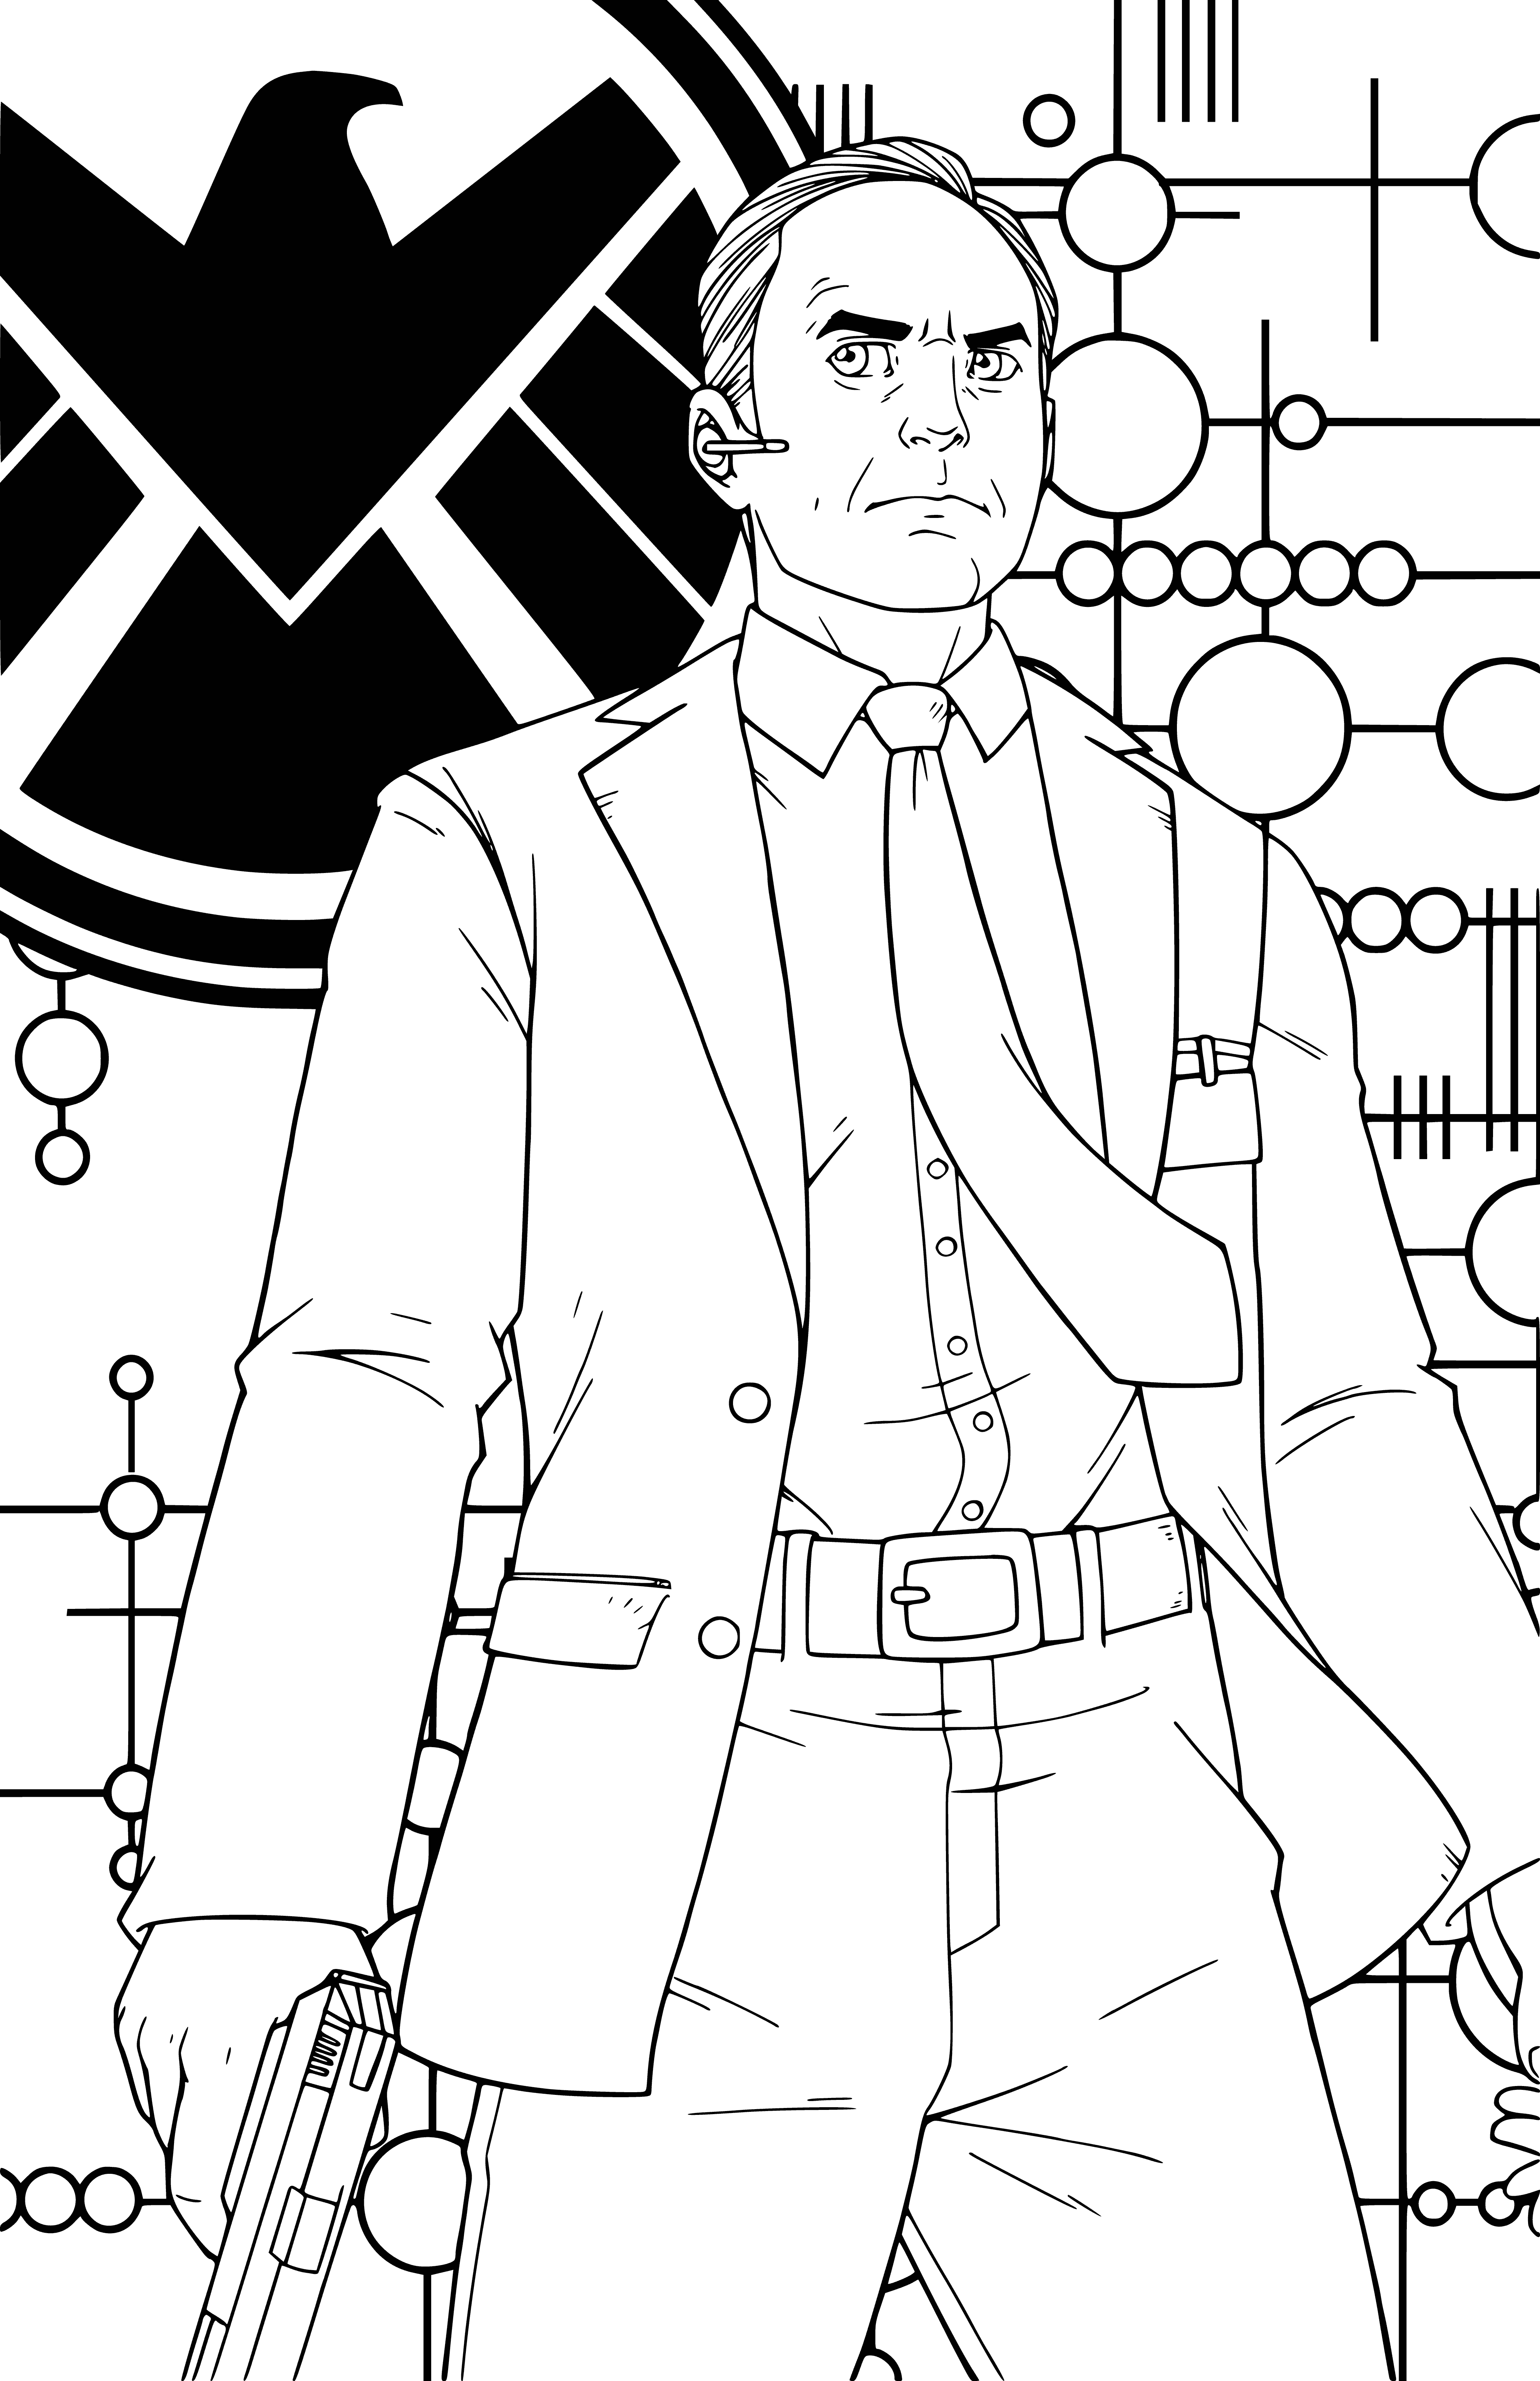 Agent SHIELD T. Phil Colson coloring page